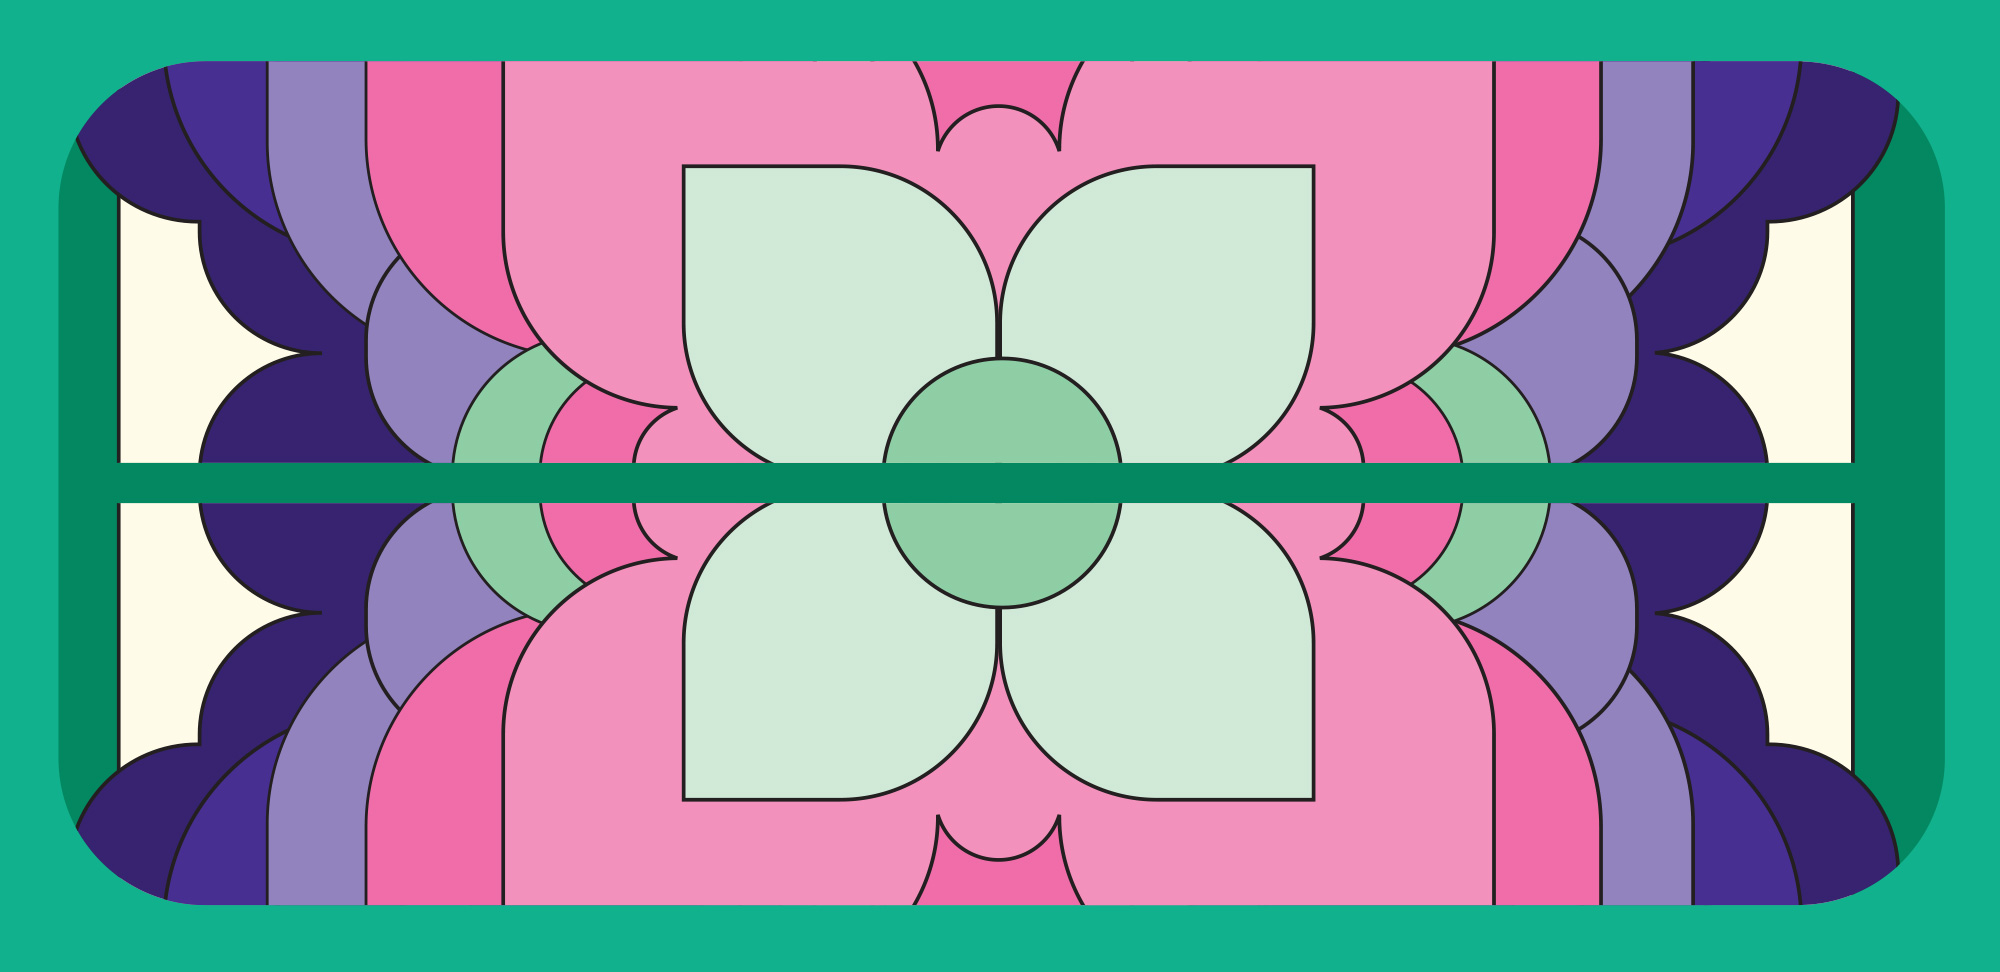 Illustration of a mirrored pattern